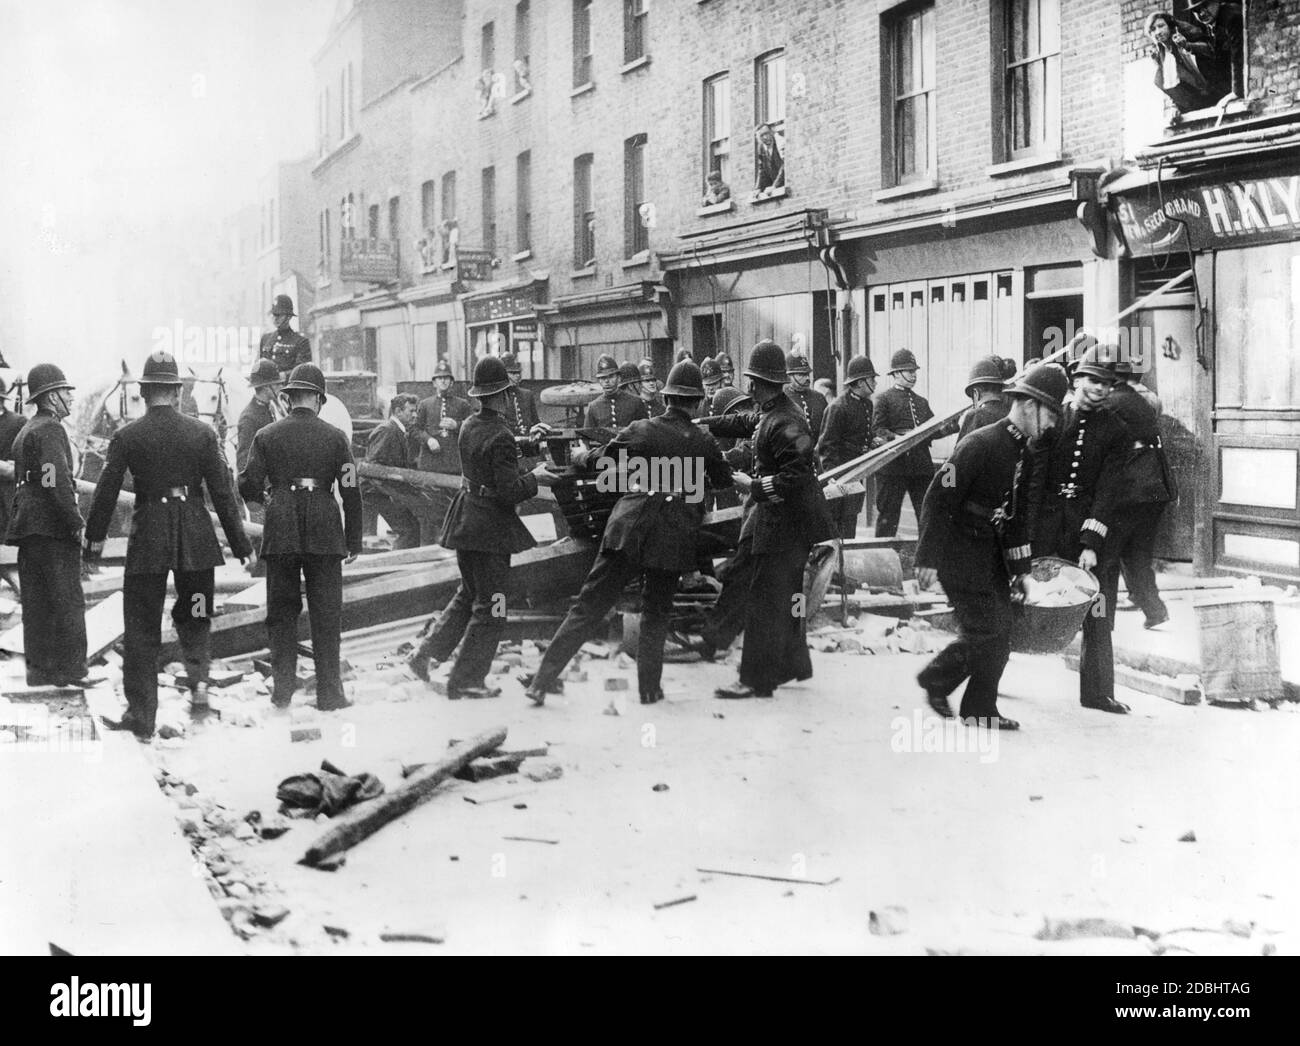 'Due to a forbidden march of the ''British Union of Fascists'' (BUF), serious clashes broke out in the London district of Whitechapel. Police officers cleaning up a destroyed street.' Stock Photo